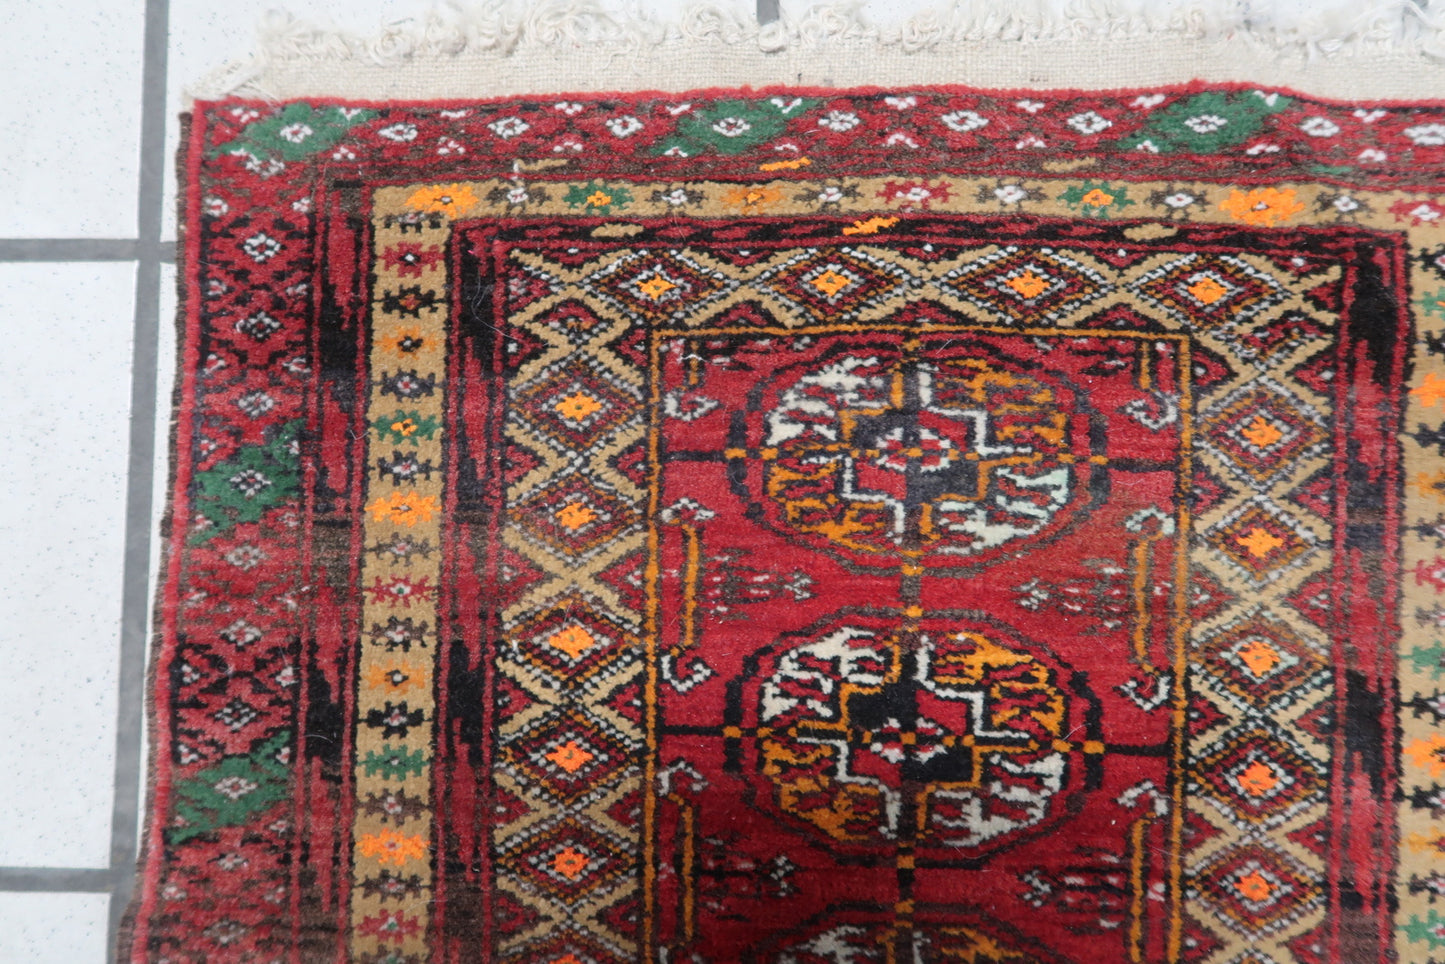 Detailed view of the wool material and craftsmanship of the Afghan Ersari mat